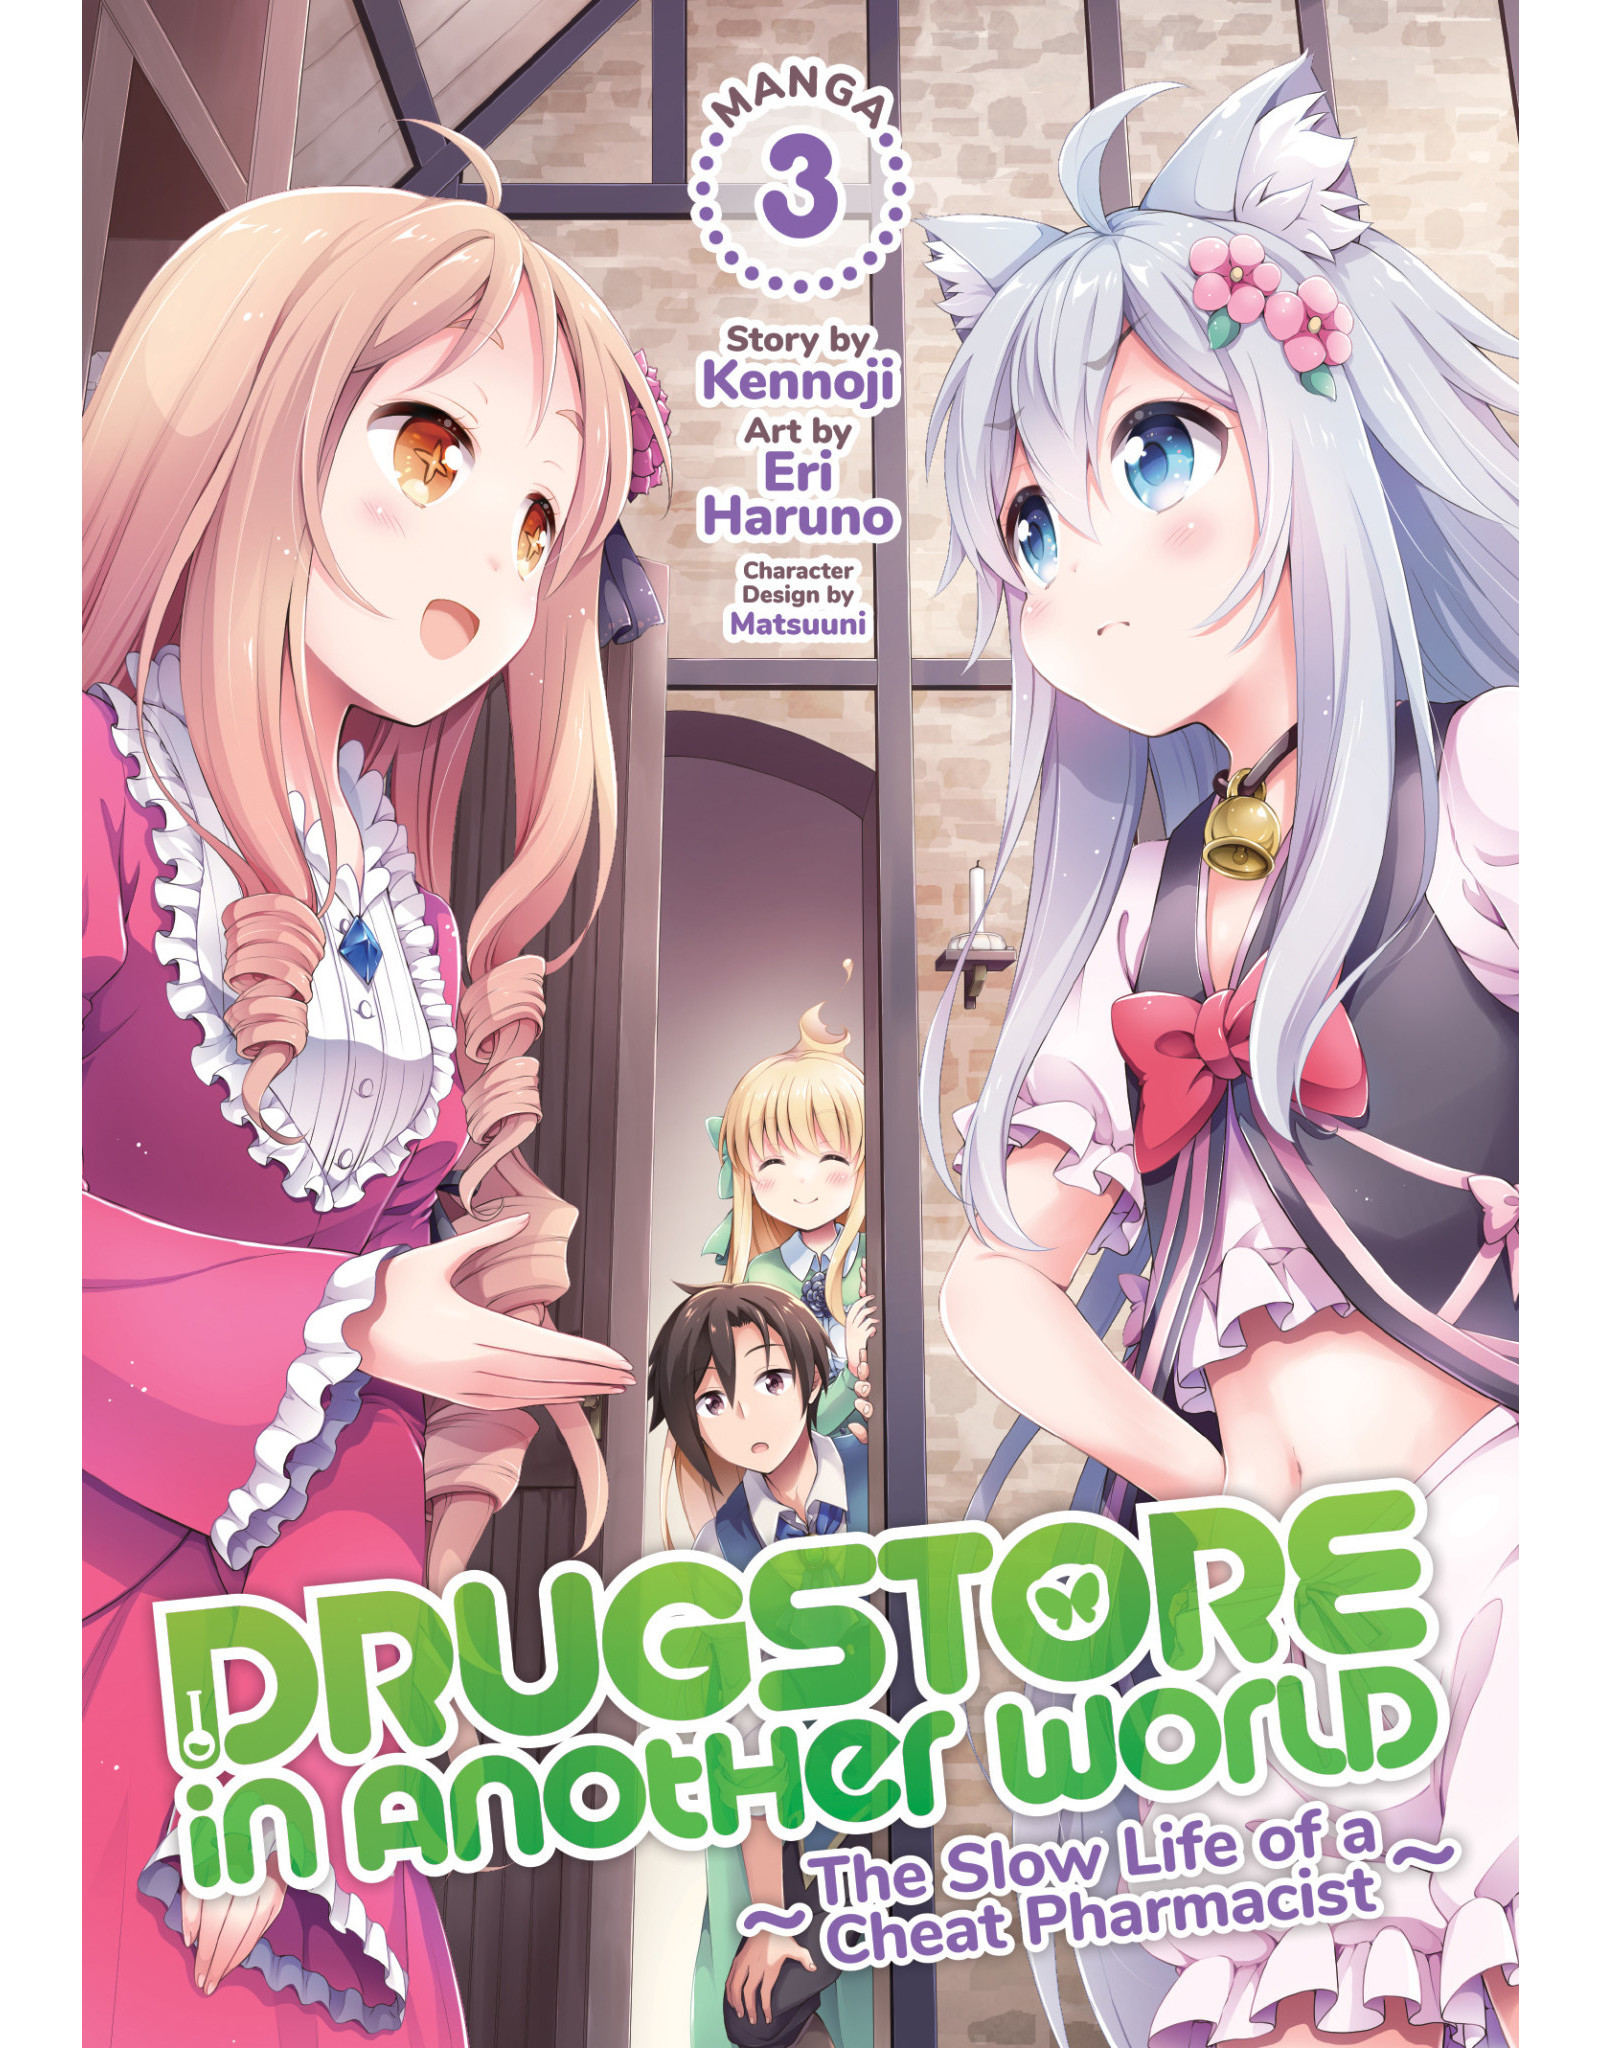 Drugstore in Another World: The Slow Life of a Cheat Pharmacist 03 (English) - Manga